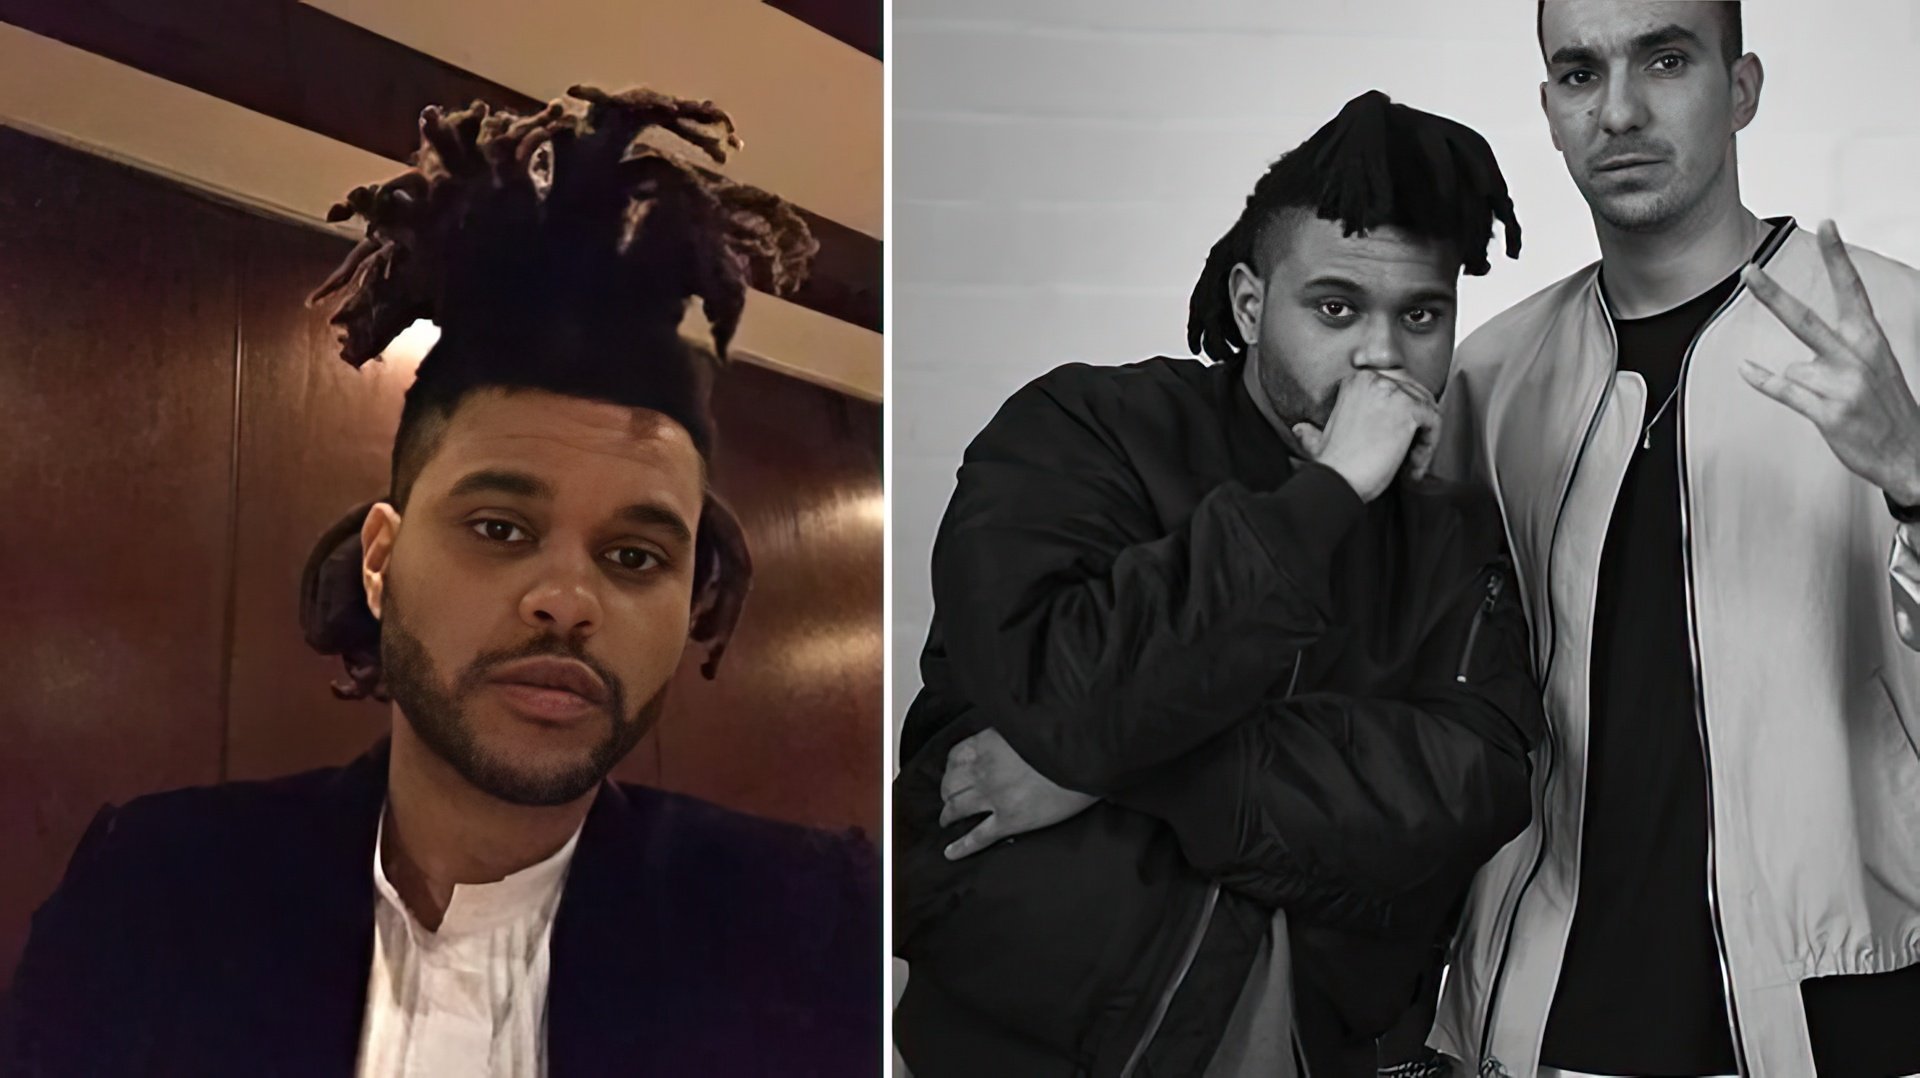 The Weeknd in the beginning of his career